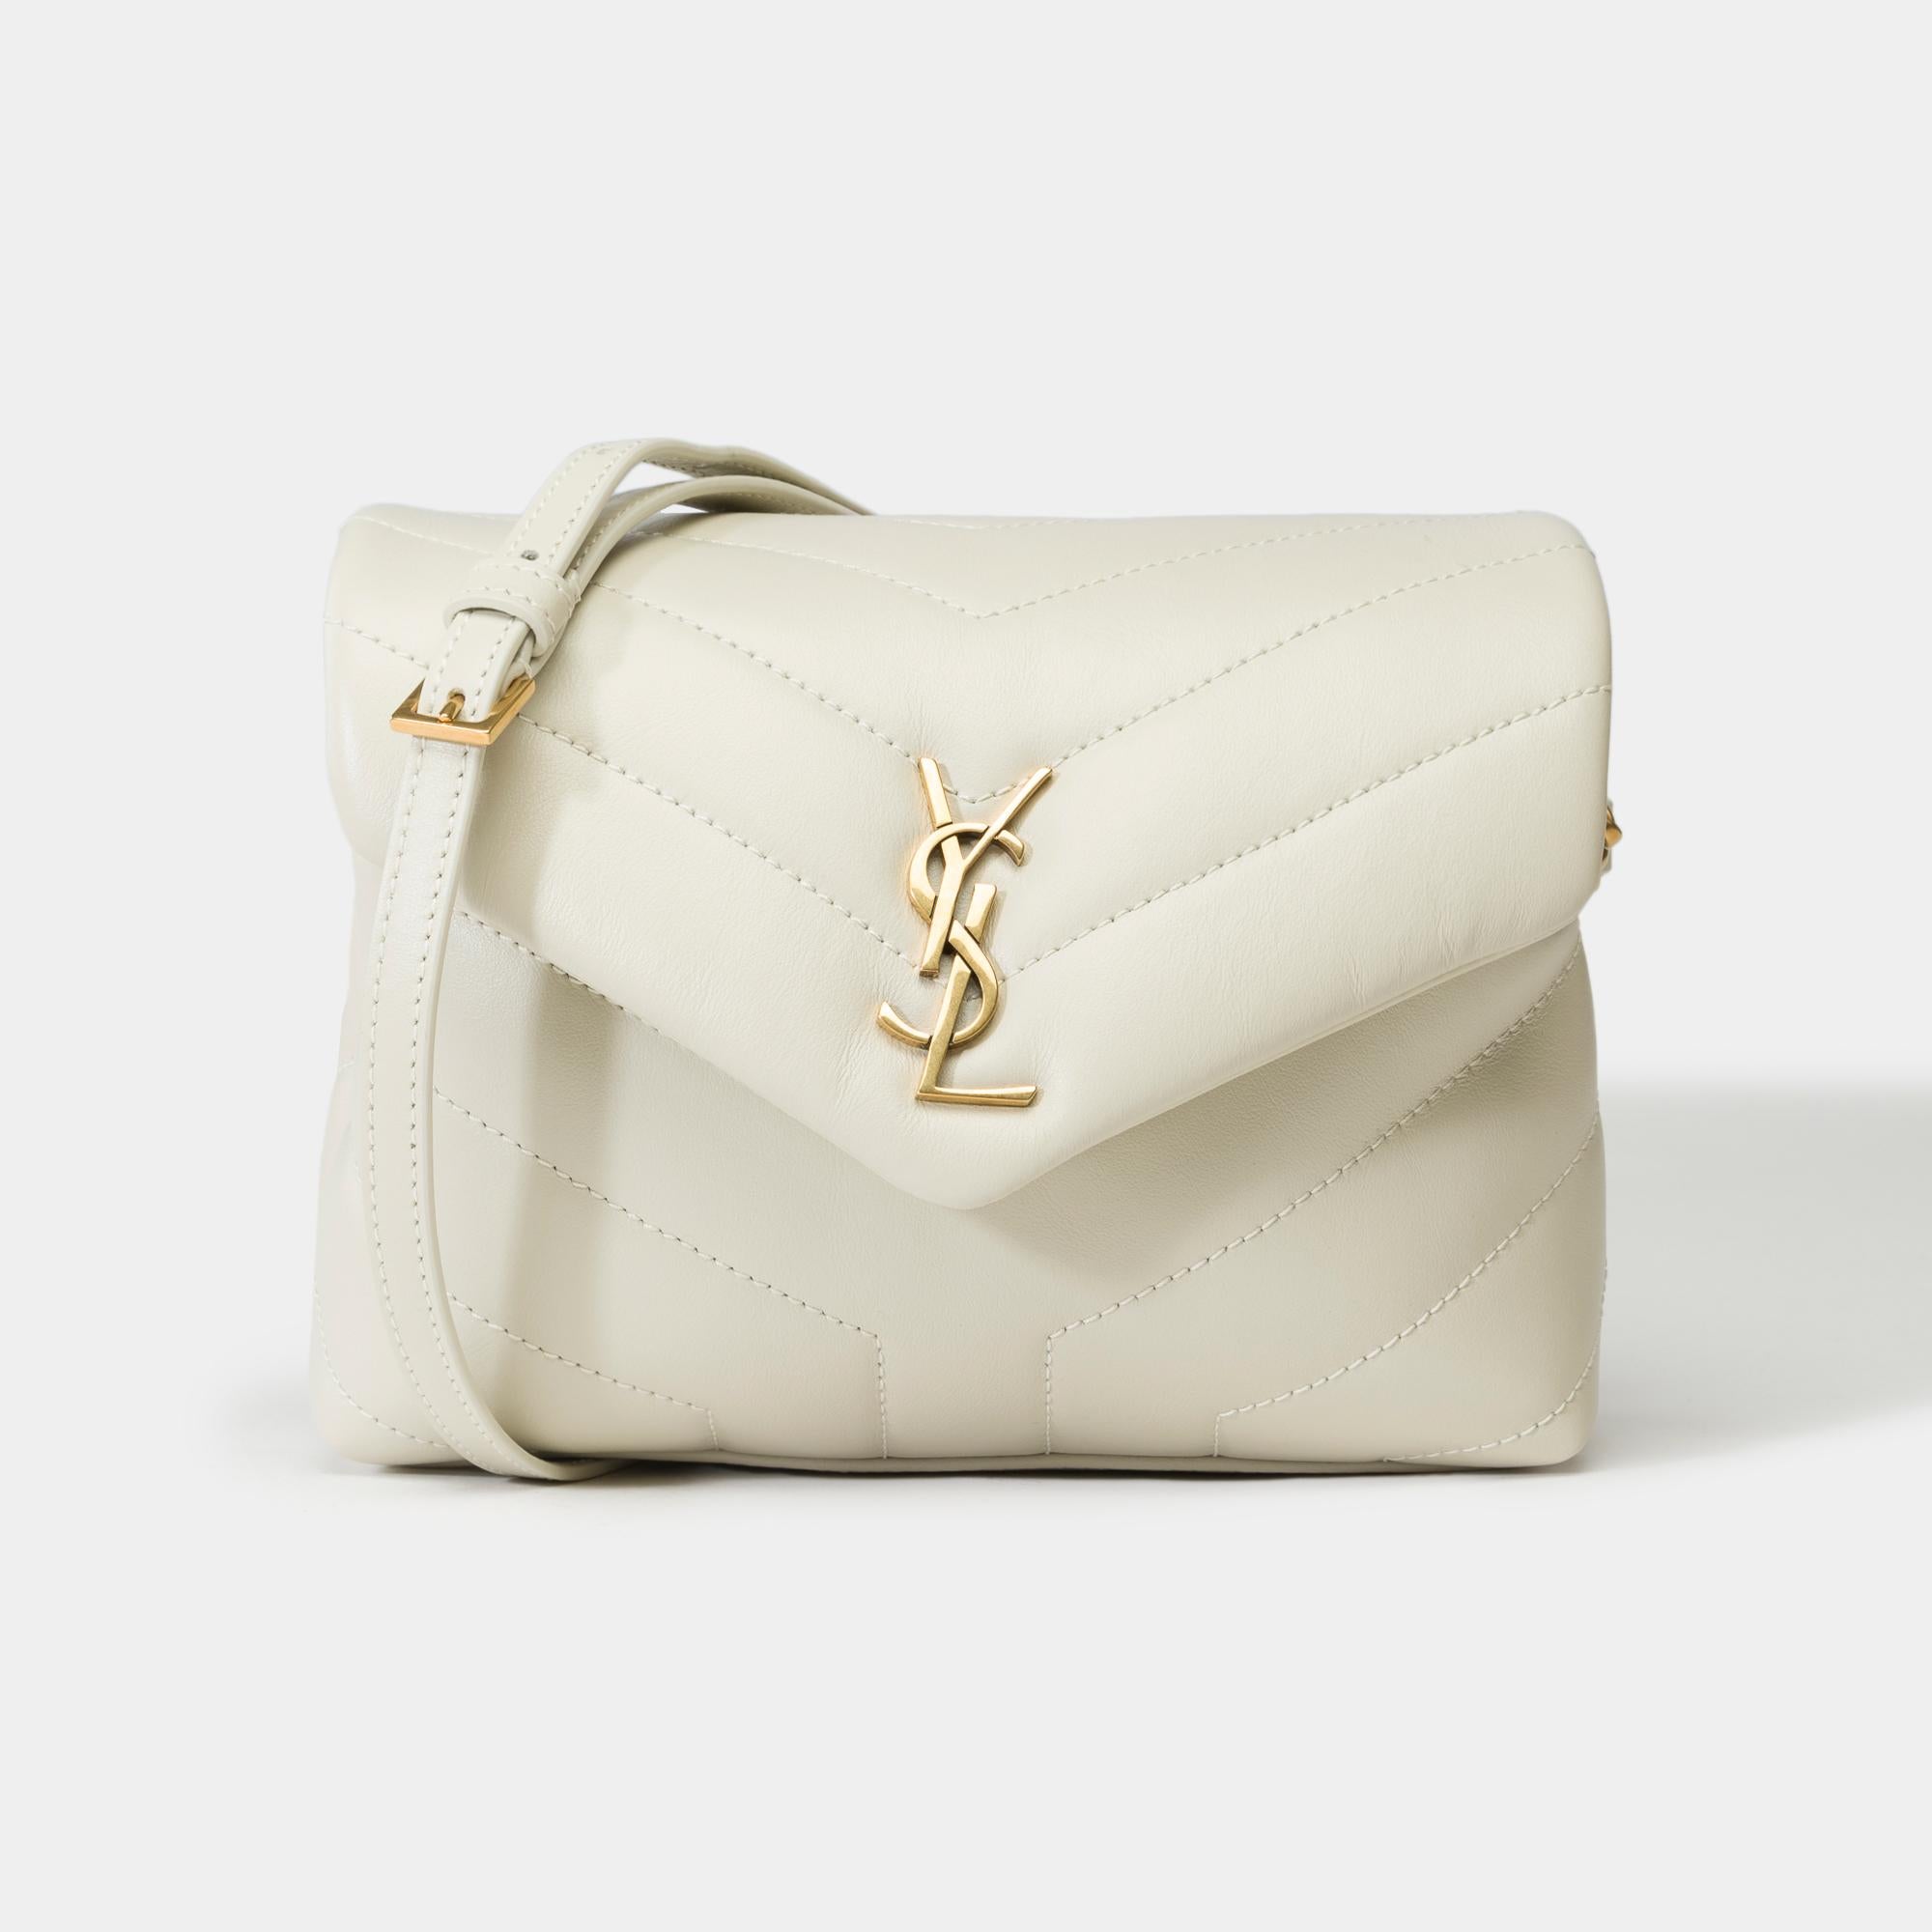 Stunning​ ​Yves​ ​Saint​ ​Laurent​ ​Loulou​ ​Toy​ ​bag​ ​in​ ​beige​ ​quilted​ ​calf​ ​leather​ ​and​ ​light​ ​bronze​ ​brass​ ​trim.​ ​It​ ​has​ ​two​ ​compartments,​ ​a​ ​removable​ ​and​ ​adjustable​ ​shoulder​ ​strap​ ​that​ ​allows​ ​a​